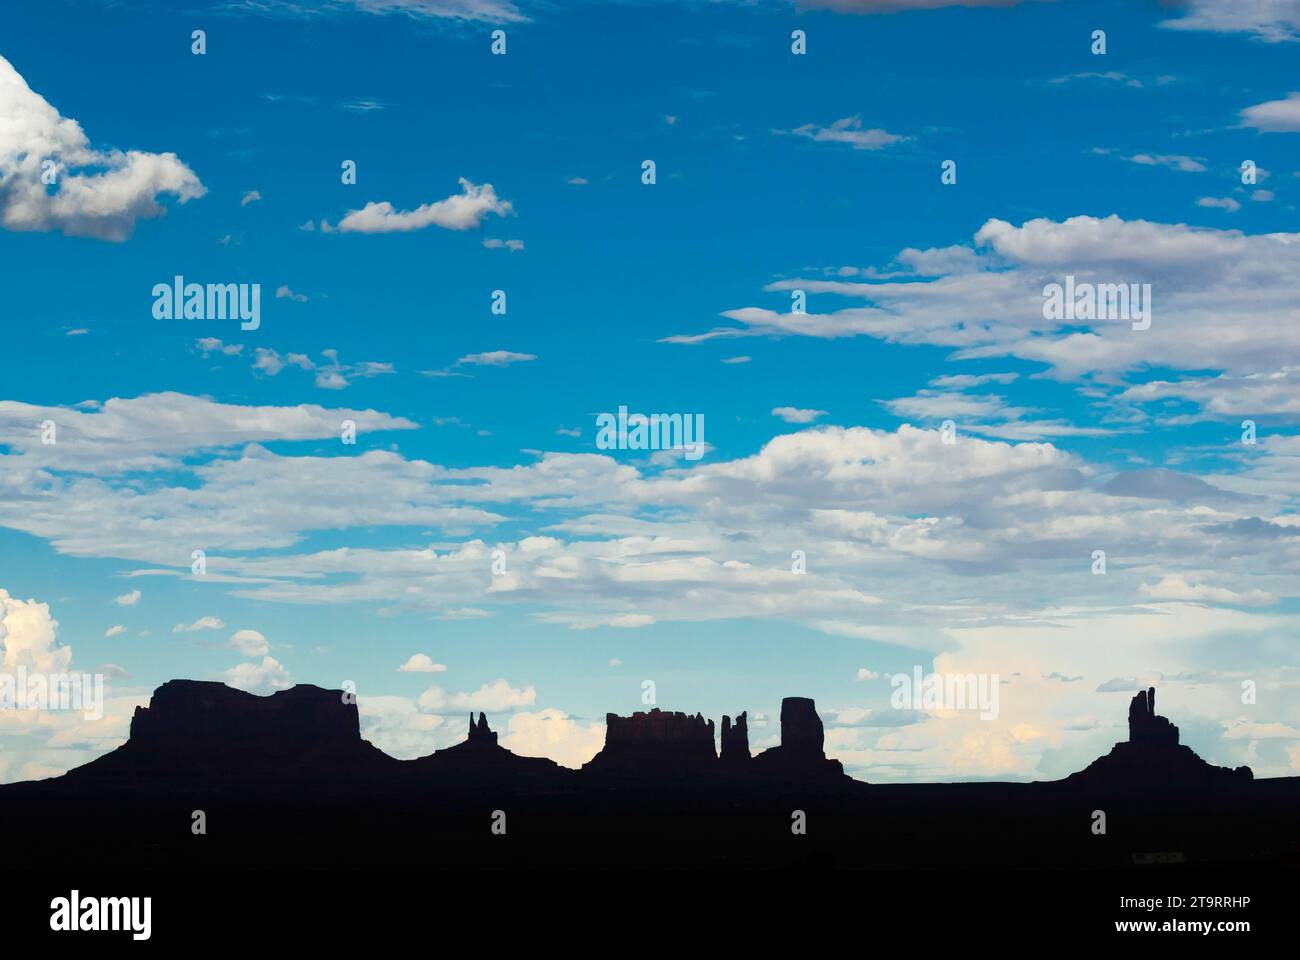 Silhouette di Monument Valley, cielo nuvoloso, nuvola, cielo, ovest, west, Utah, USA Foto Stock